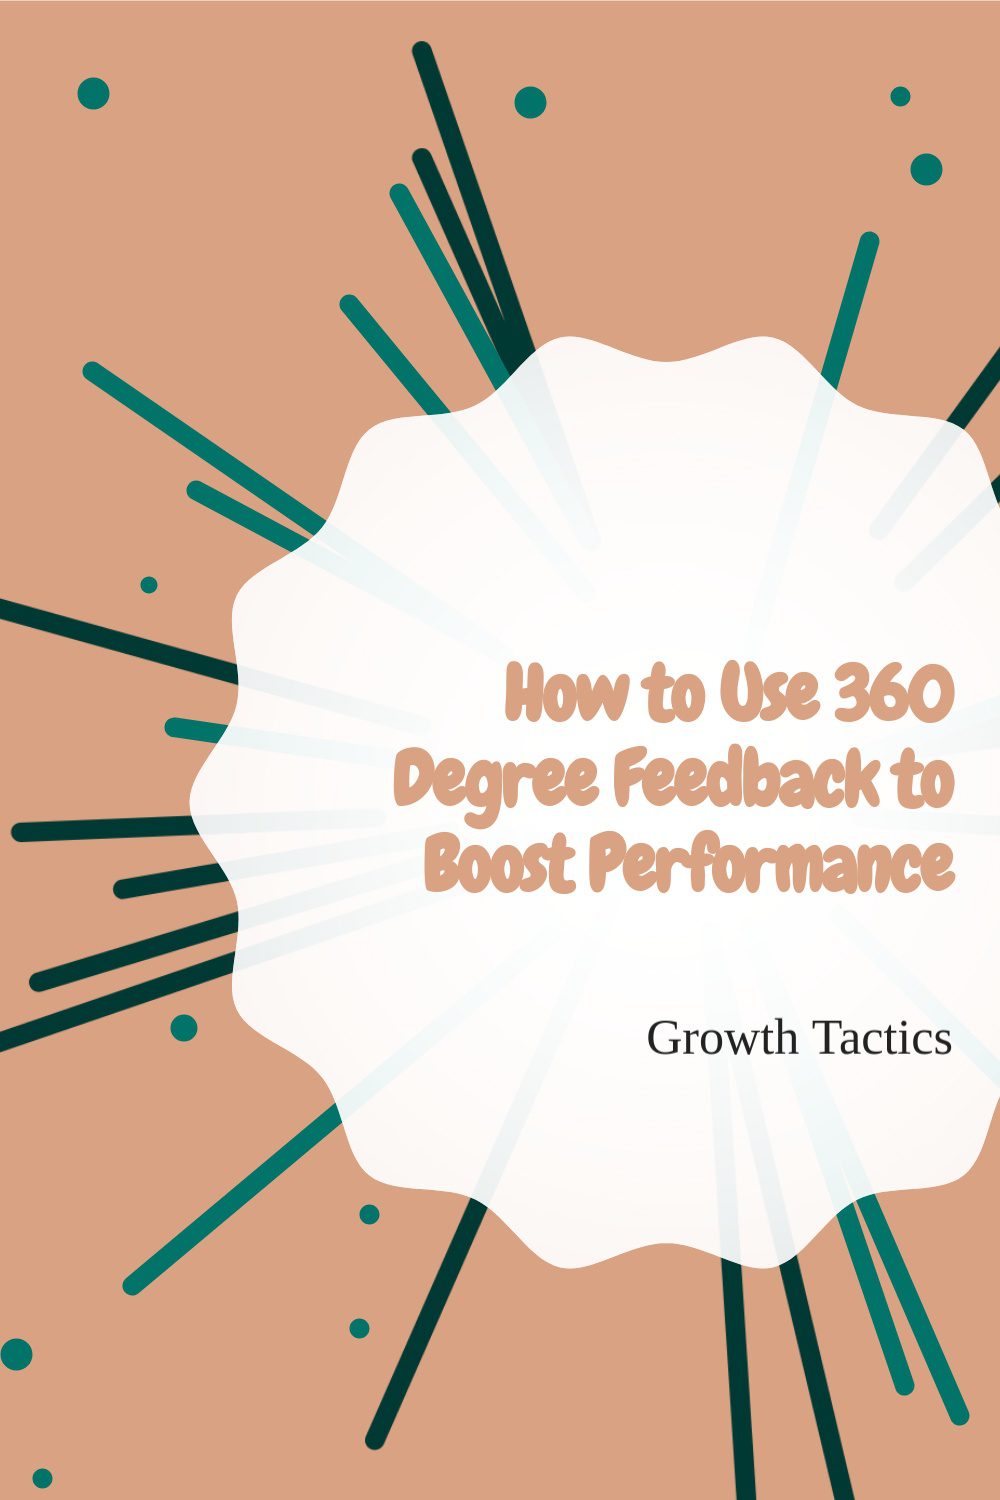 How to Use 360 Degree Feedback to Boost Performance